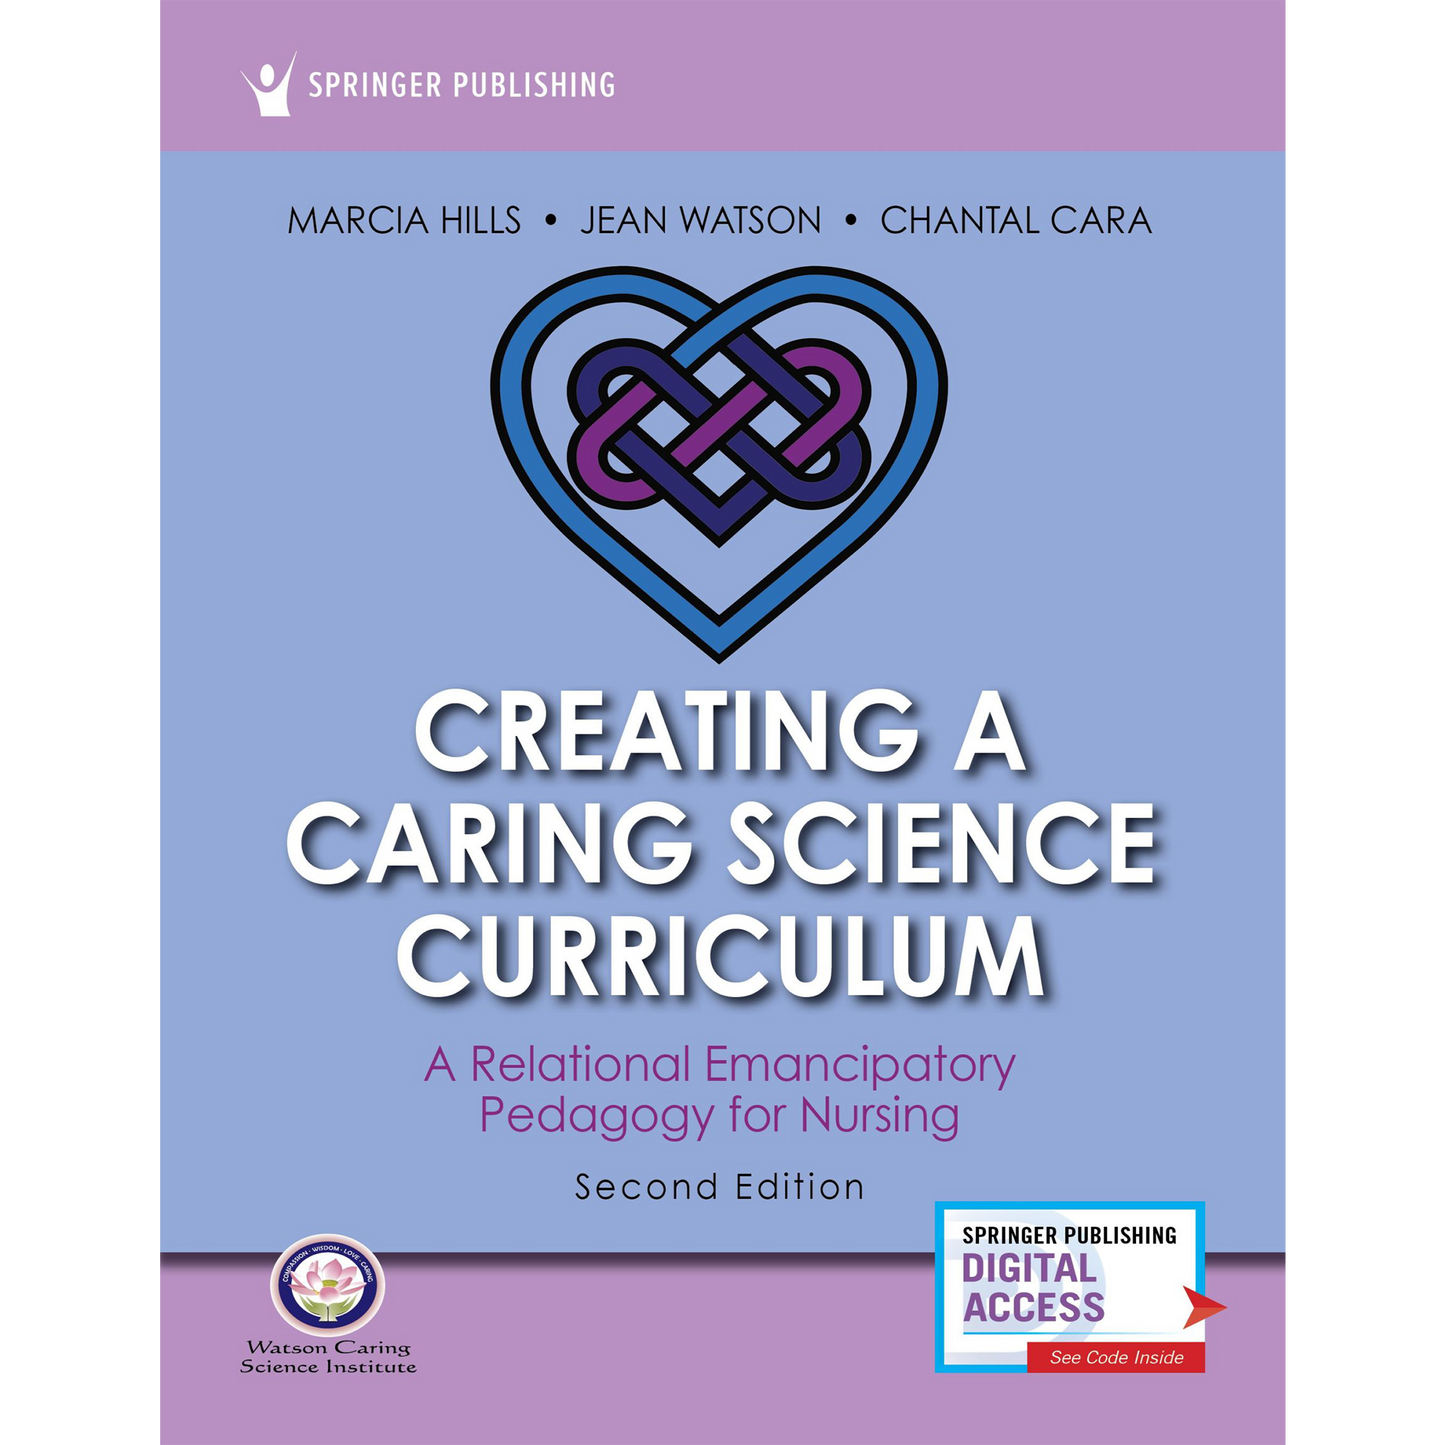 Creating a Caring Science Curriculum, 2nd Edition